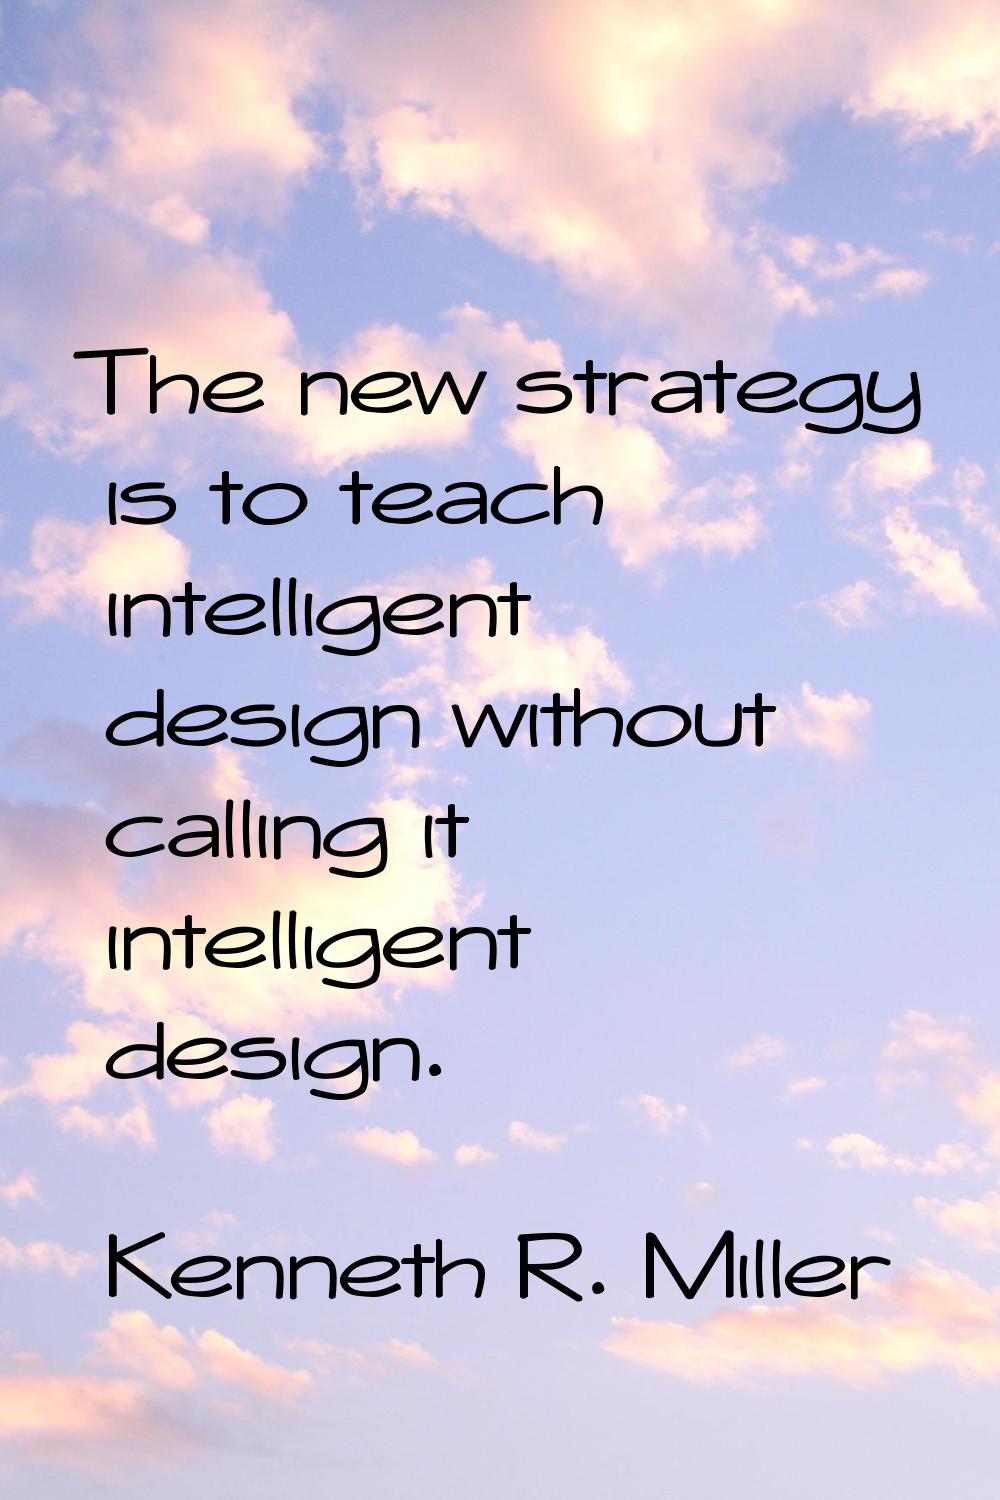 The new strategy is to teach intelligent design without calling it intelligent design.